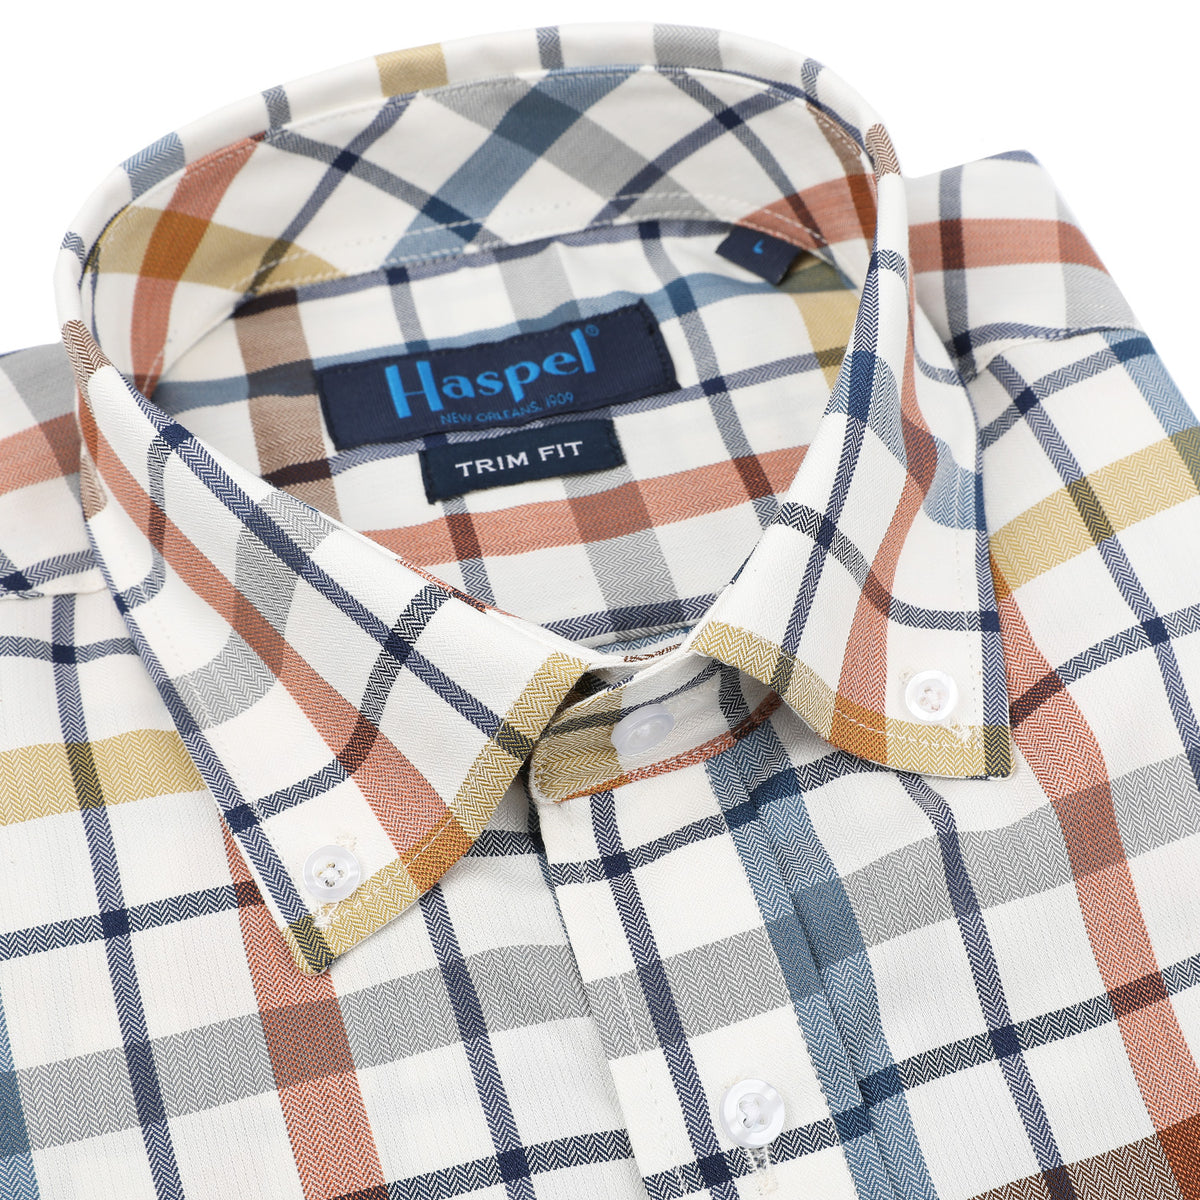 Rock the rustic vibes with Apres Blue, Brown &amp; Rust Brushed Cotton Check. This cozy plaid shirt features an eye-catching blue, brown, and rust colorway that&#39;s perfect for channeling New Orleans style. Be prepared to make a statement any time you wear it.  100% Cotton • Button Down Collar • Long Sleeve • Double Chest Pocket • Machine Washable • Made in Italy • Return Policy